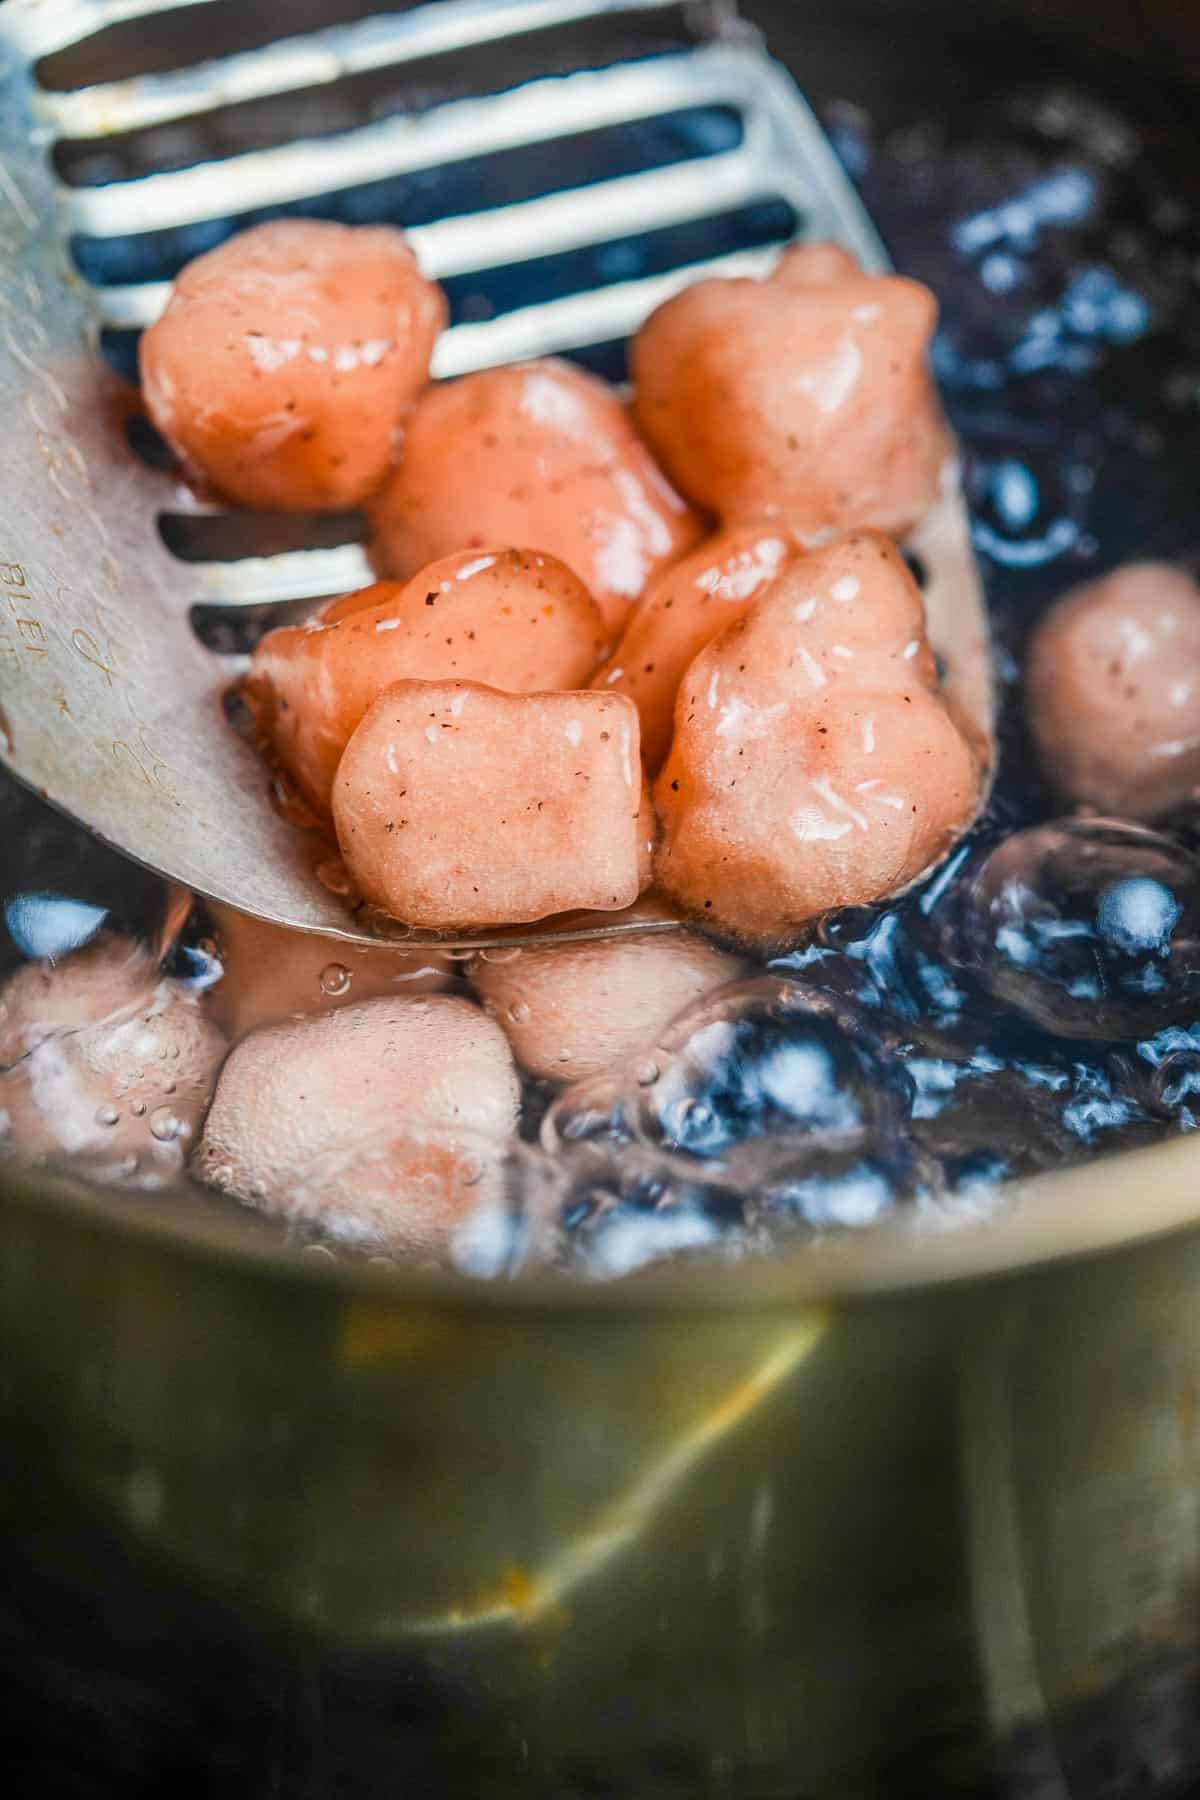 A metal slotted spoon is being used to removed cooked tapioca jellies from a pot of boiling water.